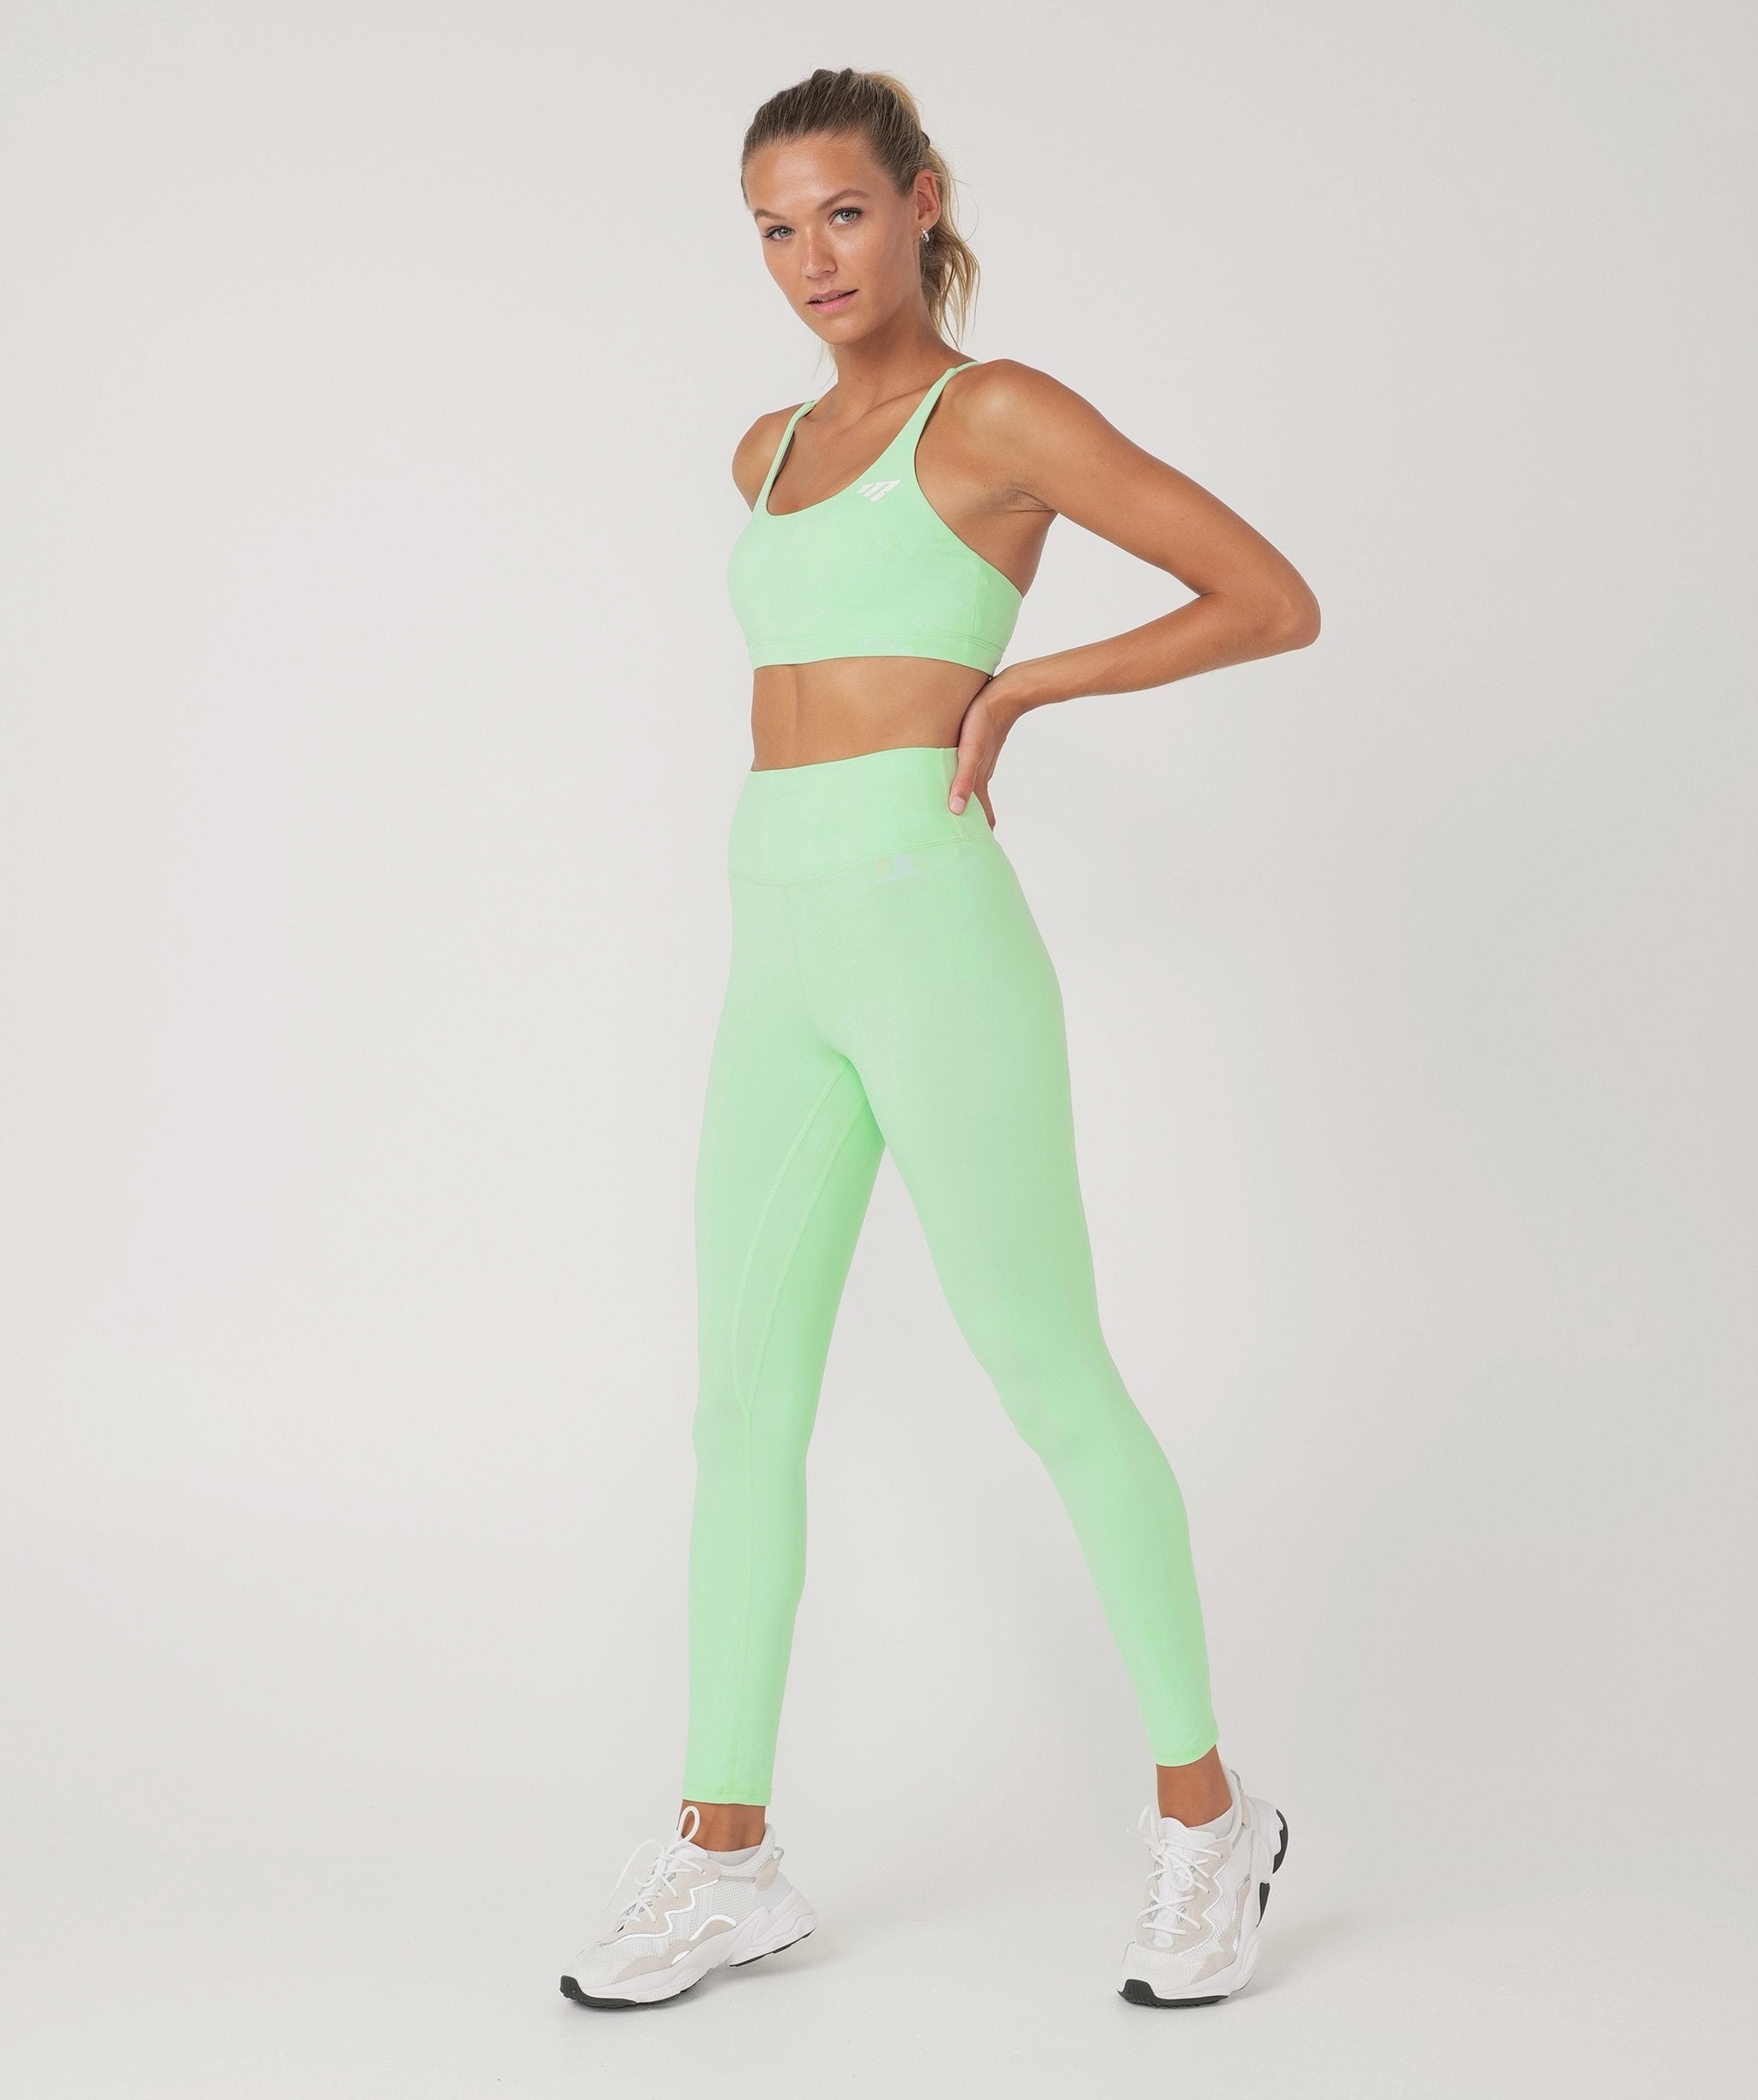 Core Strappy Sports Bra (Mint) by OneMoreRep